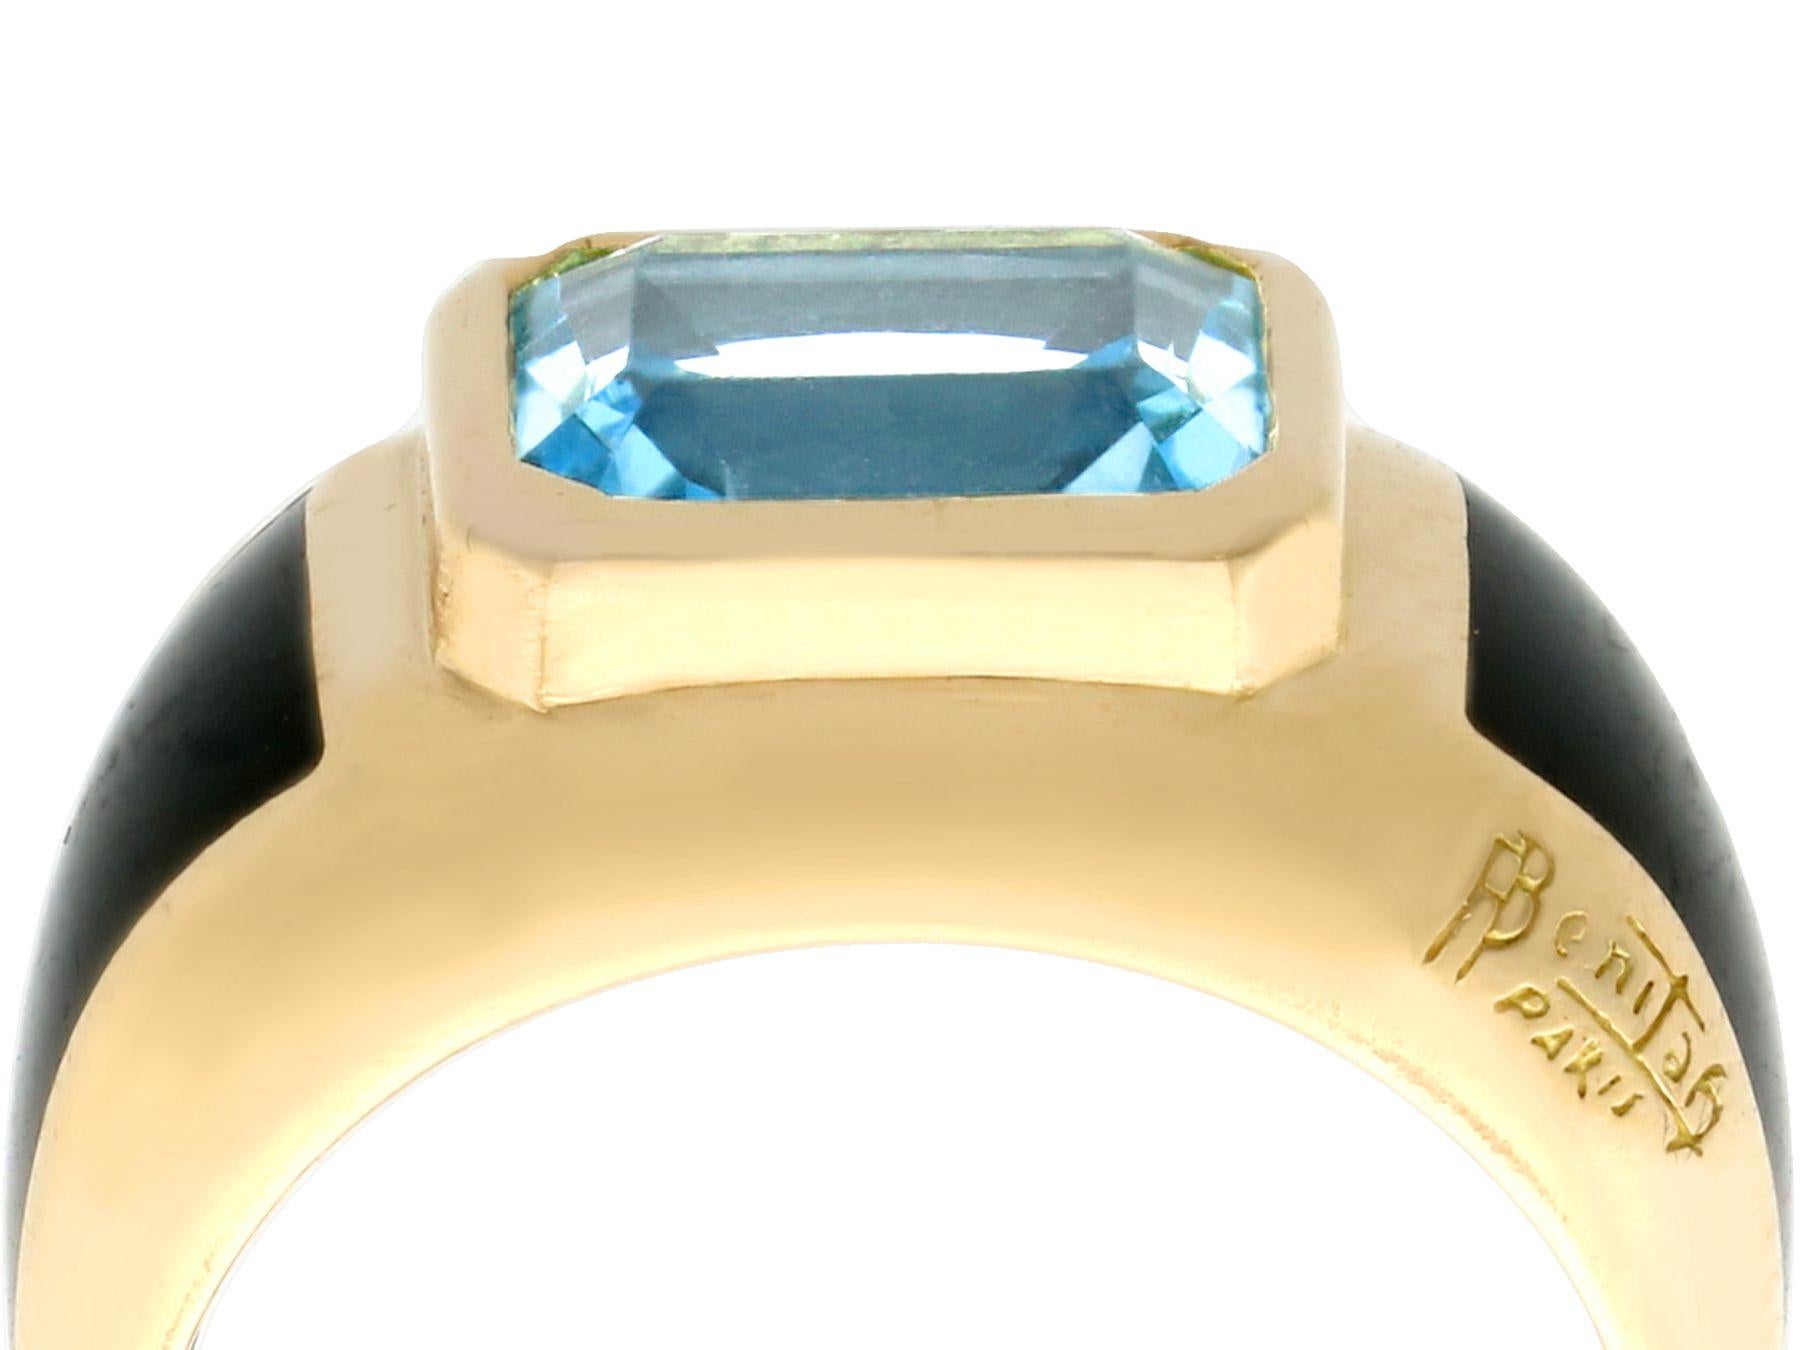 An impressive French 3.11 carat blue topaz and 18 karat yellow gold cocktail ring by Andre Benitah; part of our diverse gemstone jewelry and estate jewelry collections.

This fine and impressive blue emerald cut topaz ring has been crafted in 18k